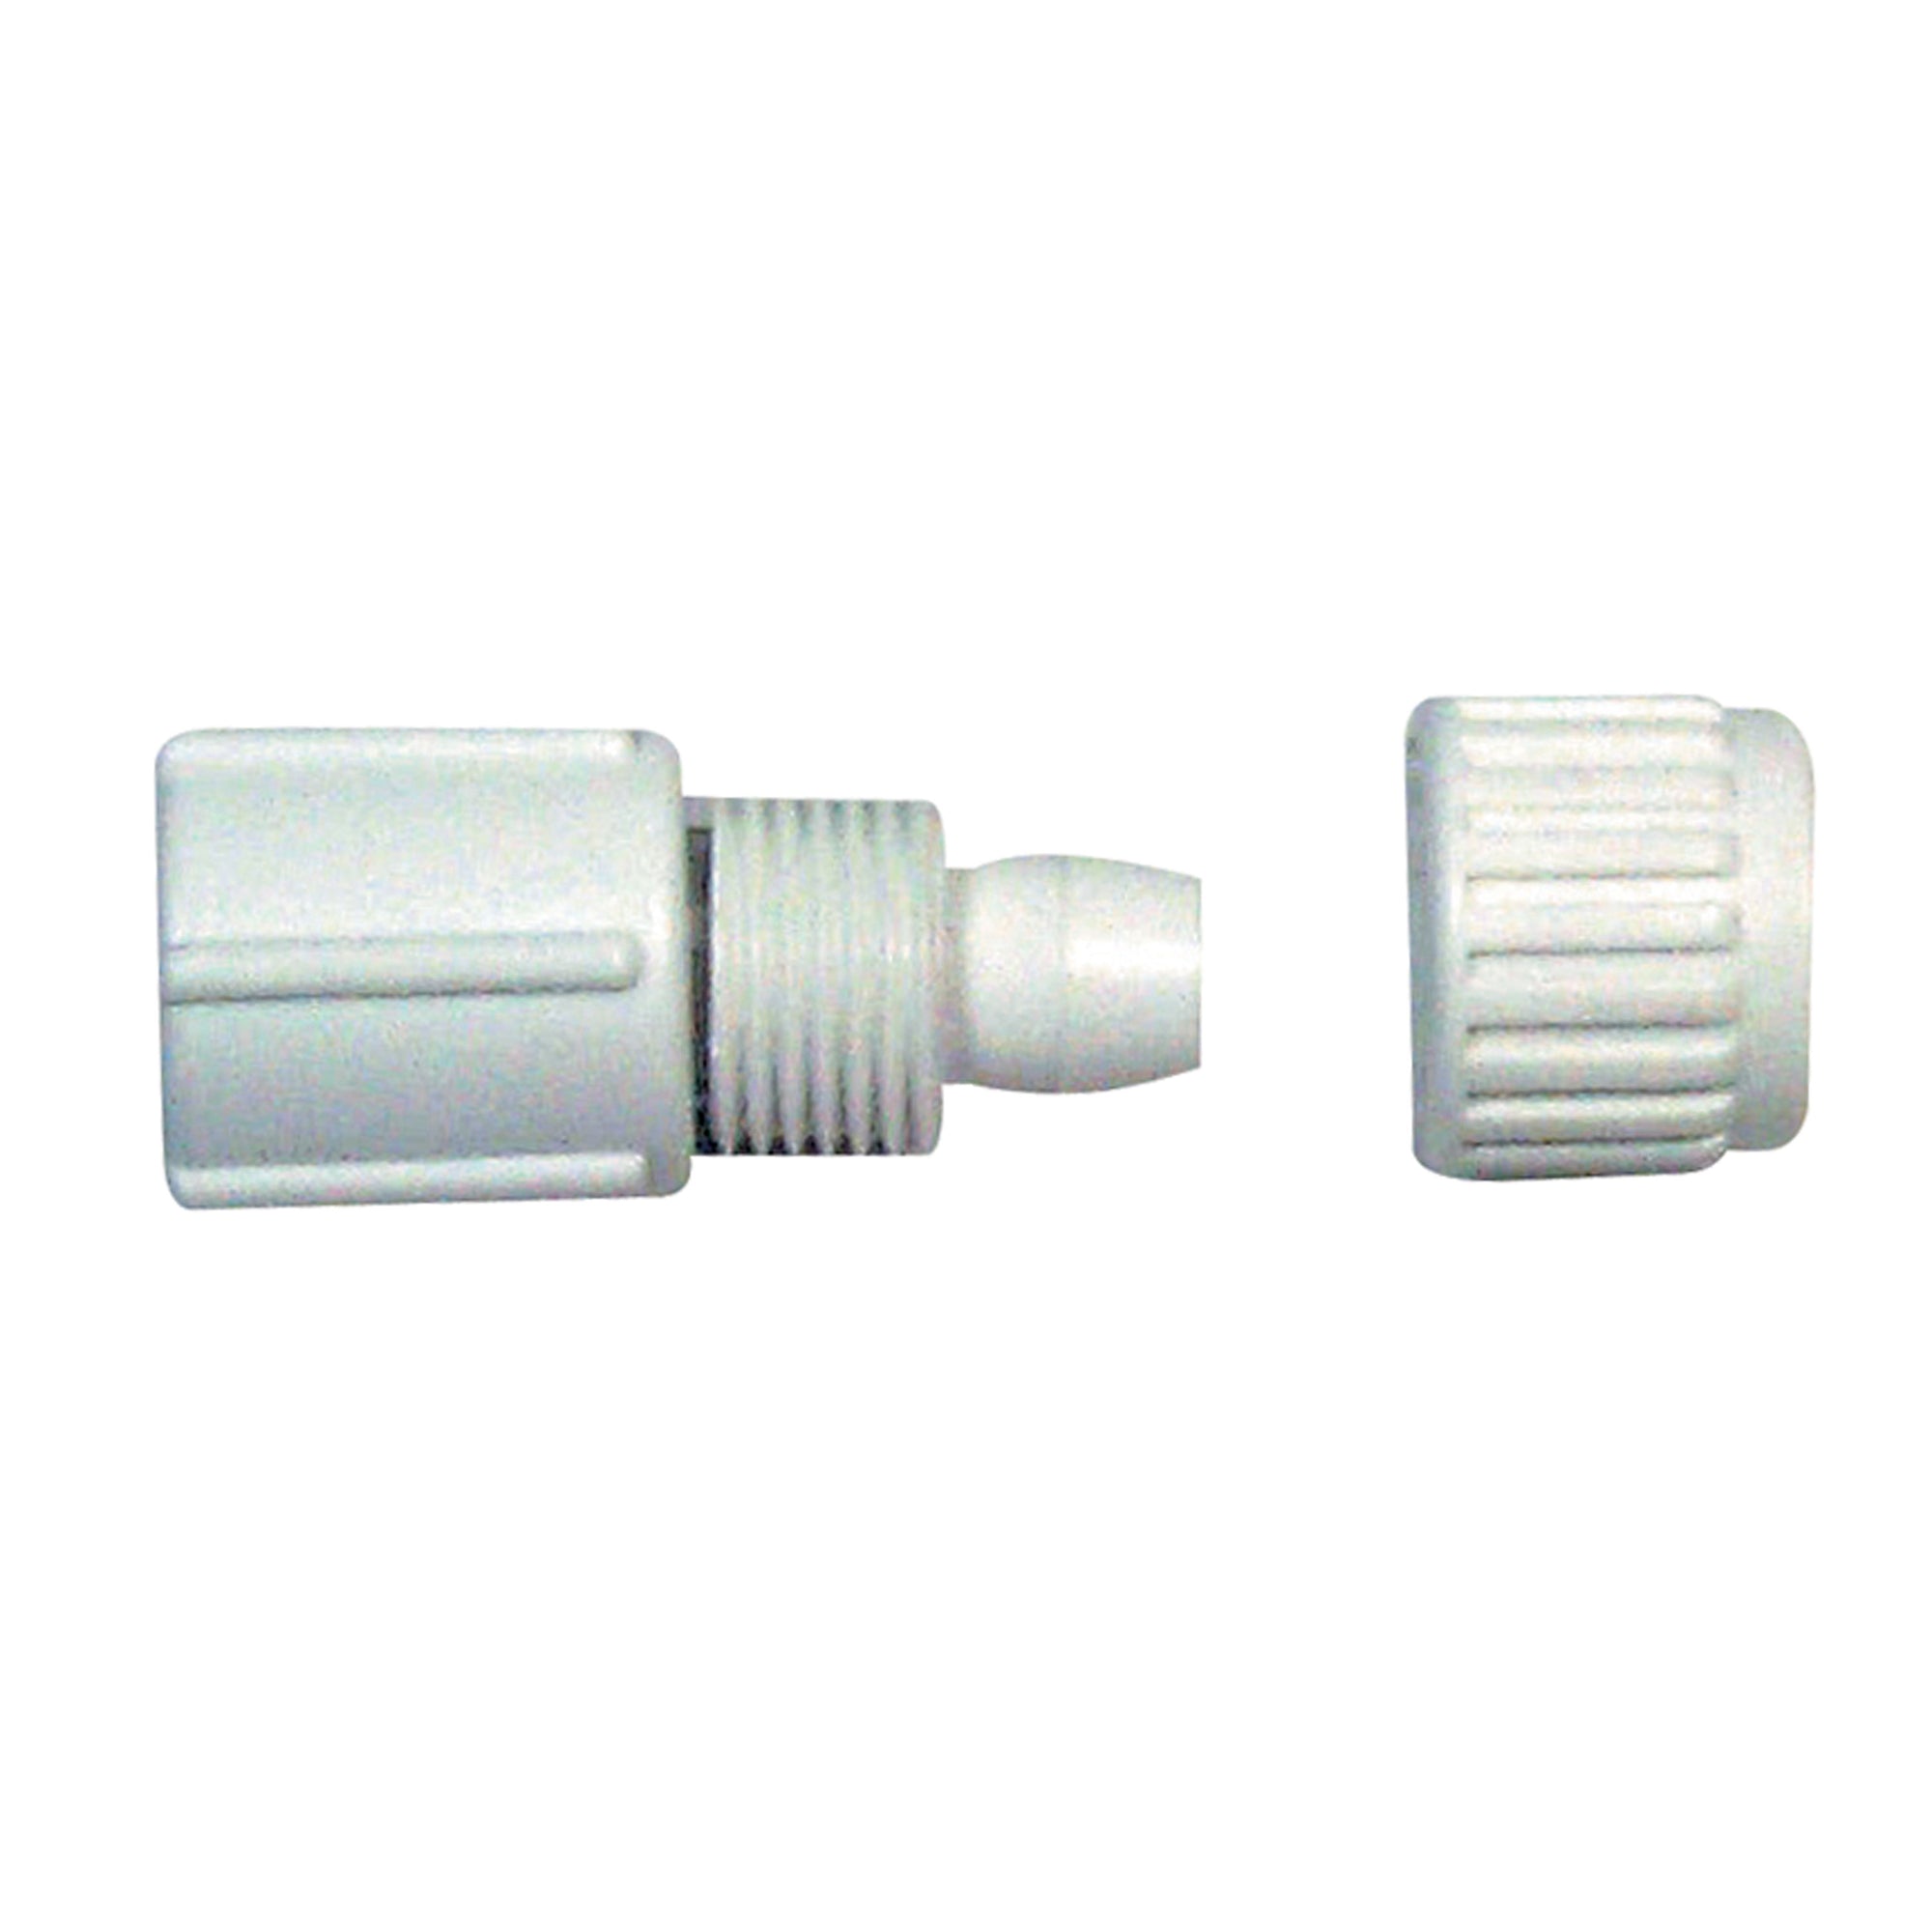 Flair-It 16874 Coupling 3/8X1/2 Fpt Swiv